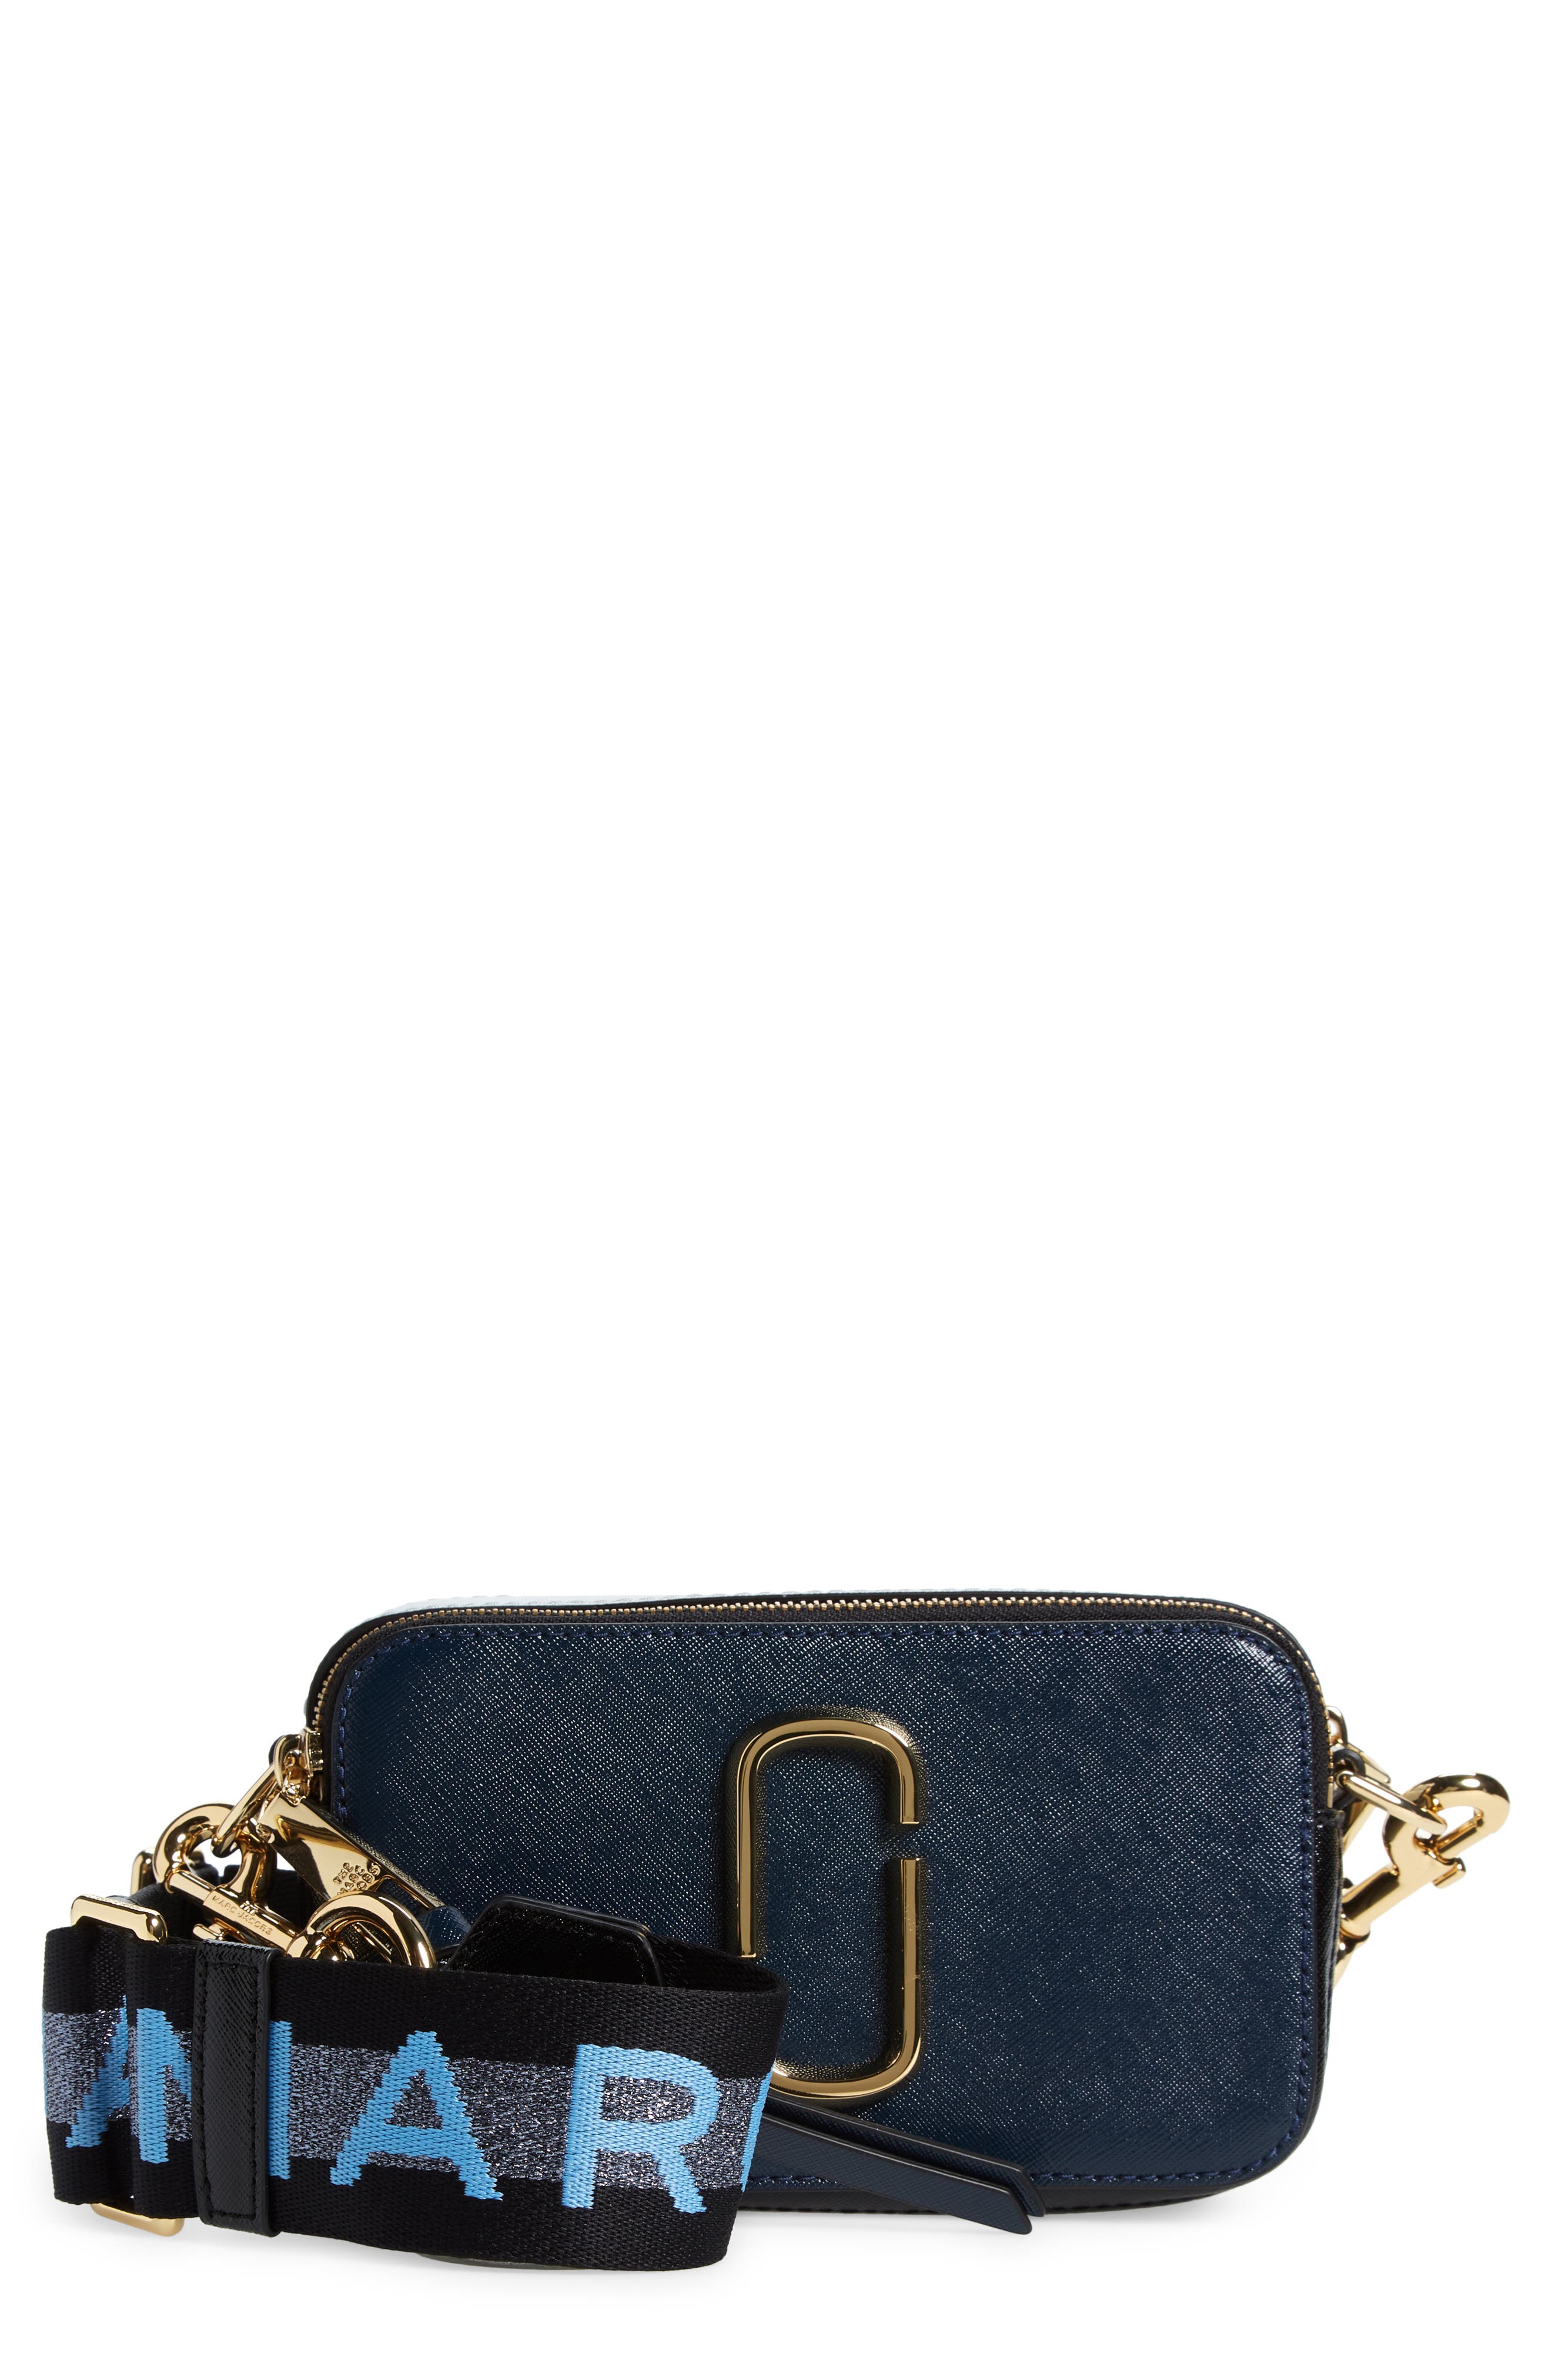 Borbonese Leather Cross-body Bag in Dark Blue Womens Bags Crossbody bags and purses Blue 